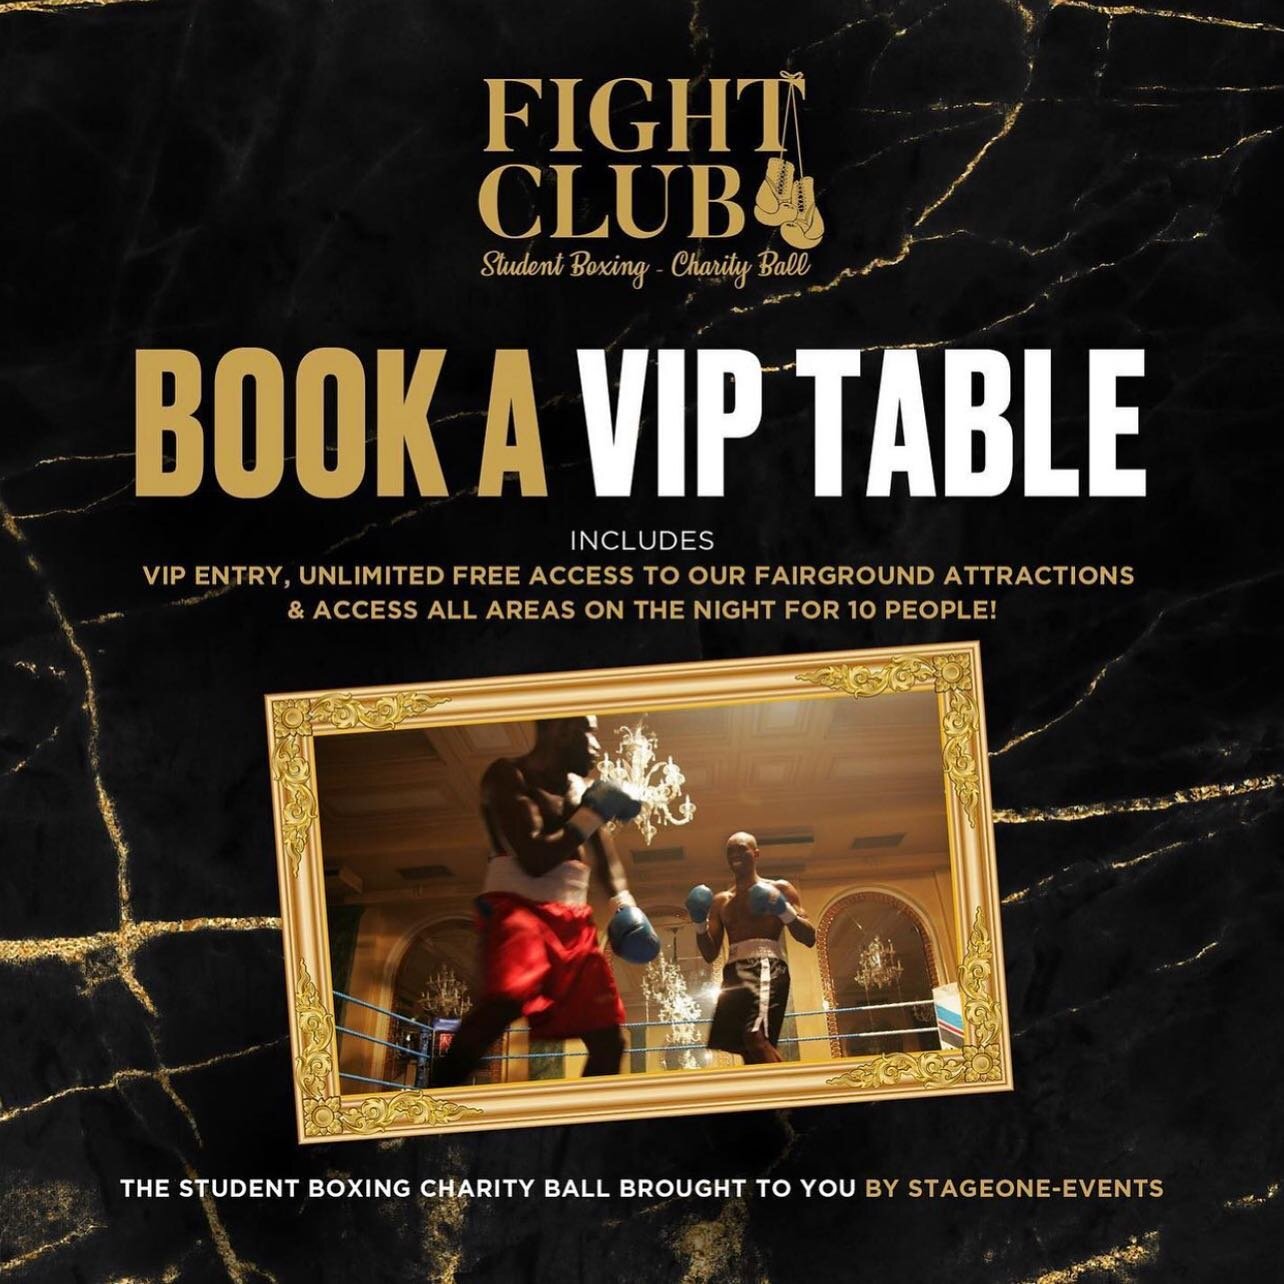 1 TABLE LEFT FOR THIS WEEK! 🥊🥂 Due to a change in circumstances 1 table has come back up available, Text Rob on 07722 224940 if you want it, first come first served! 

Get your hands on one of the Hottest tickets in town this week as FIGHT CLUB Ret